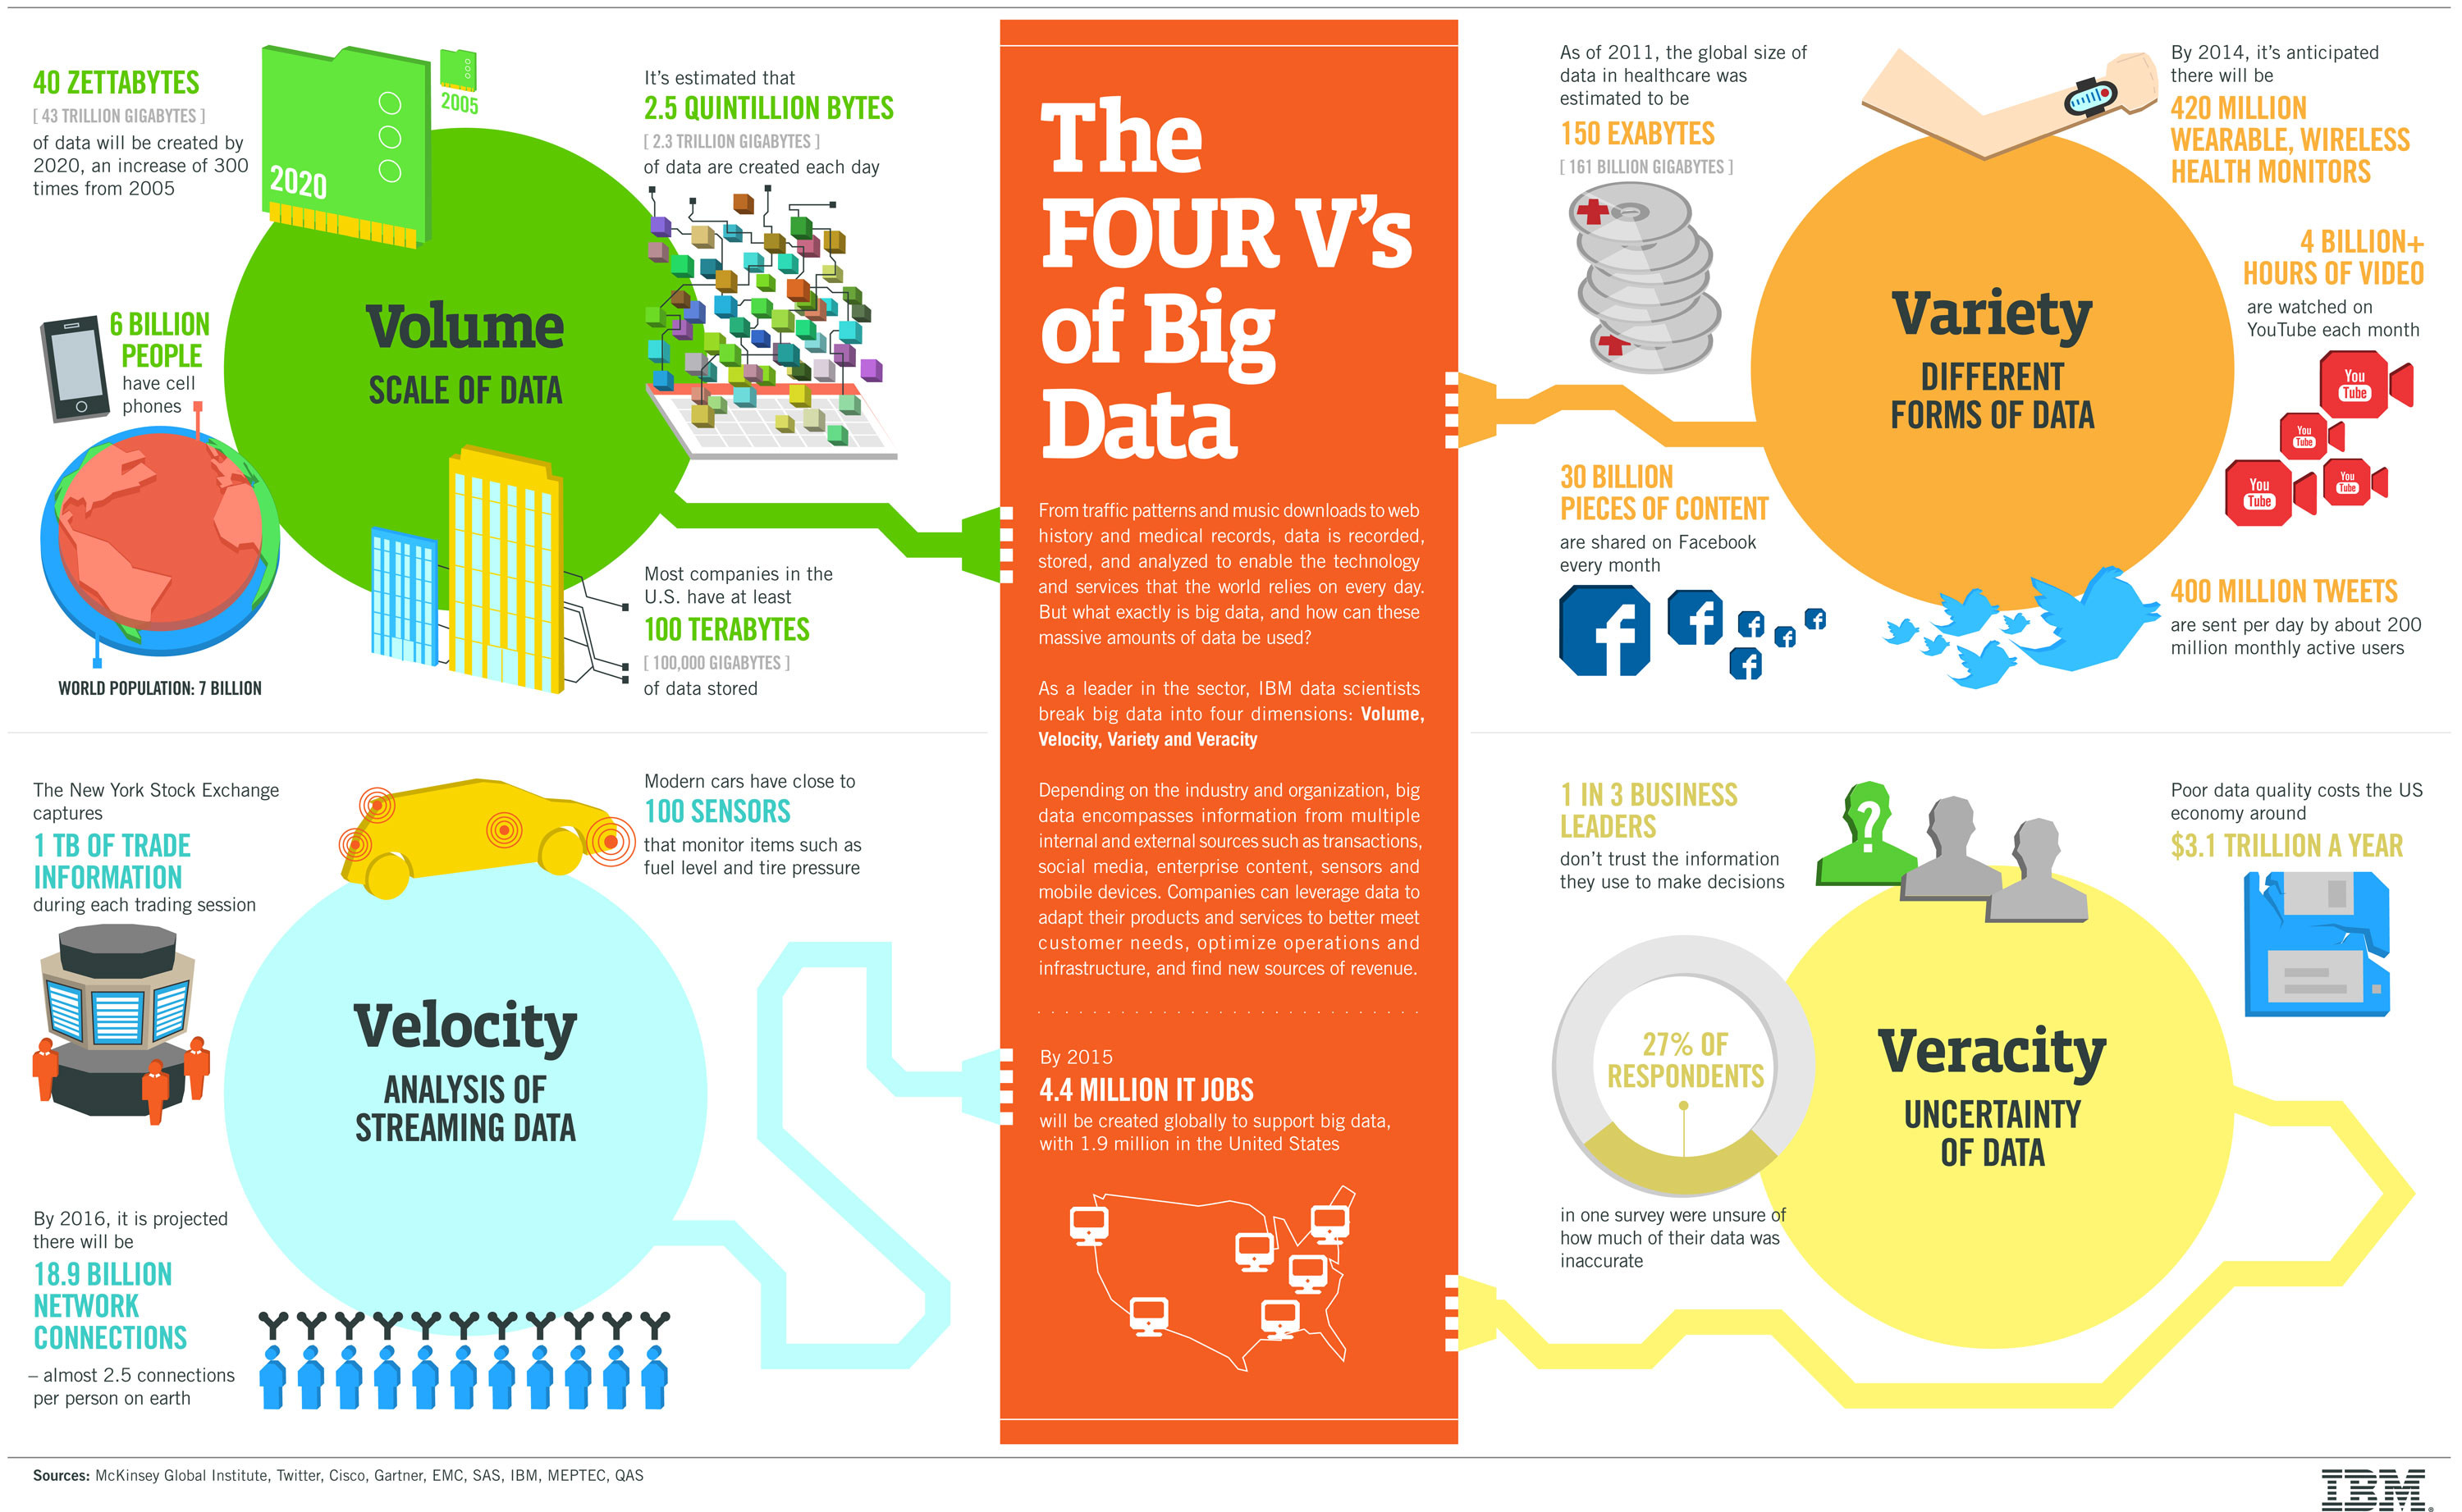 The '4 Vs' of big data, in an IBM infographic